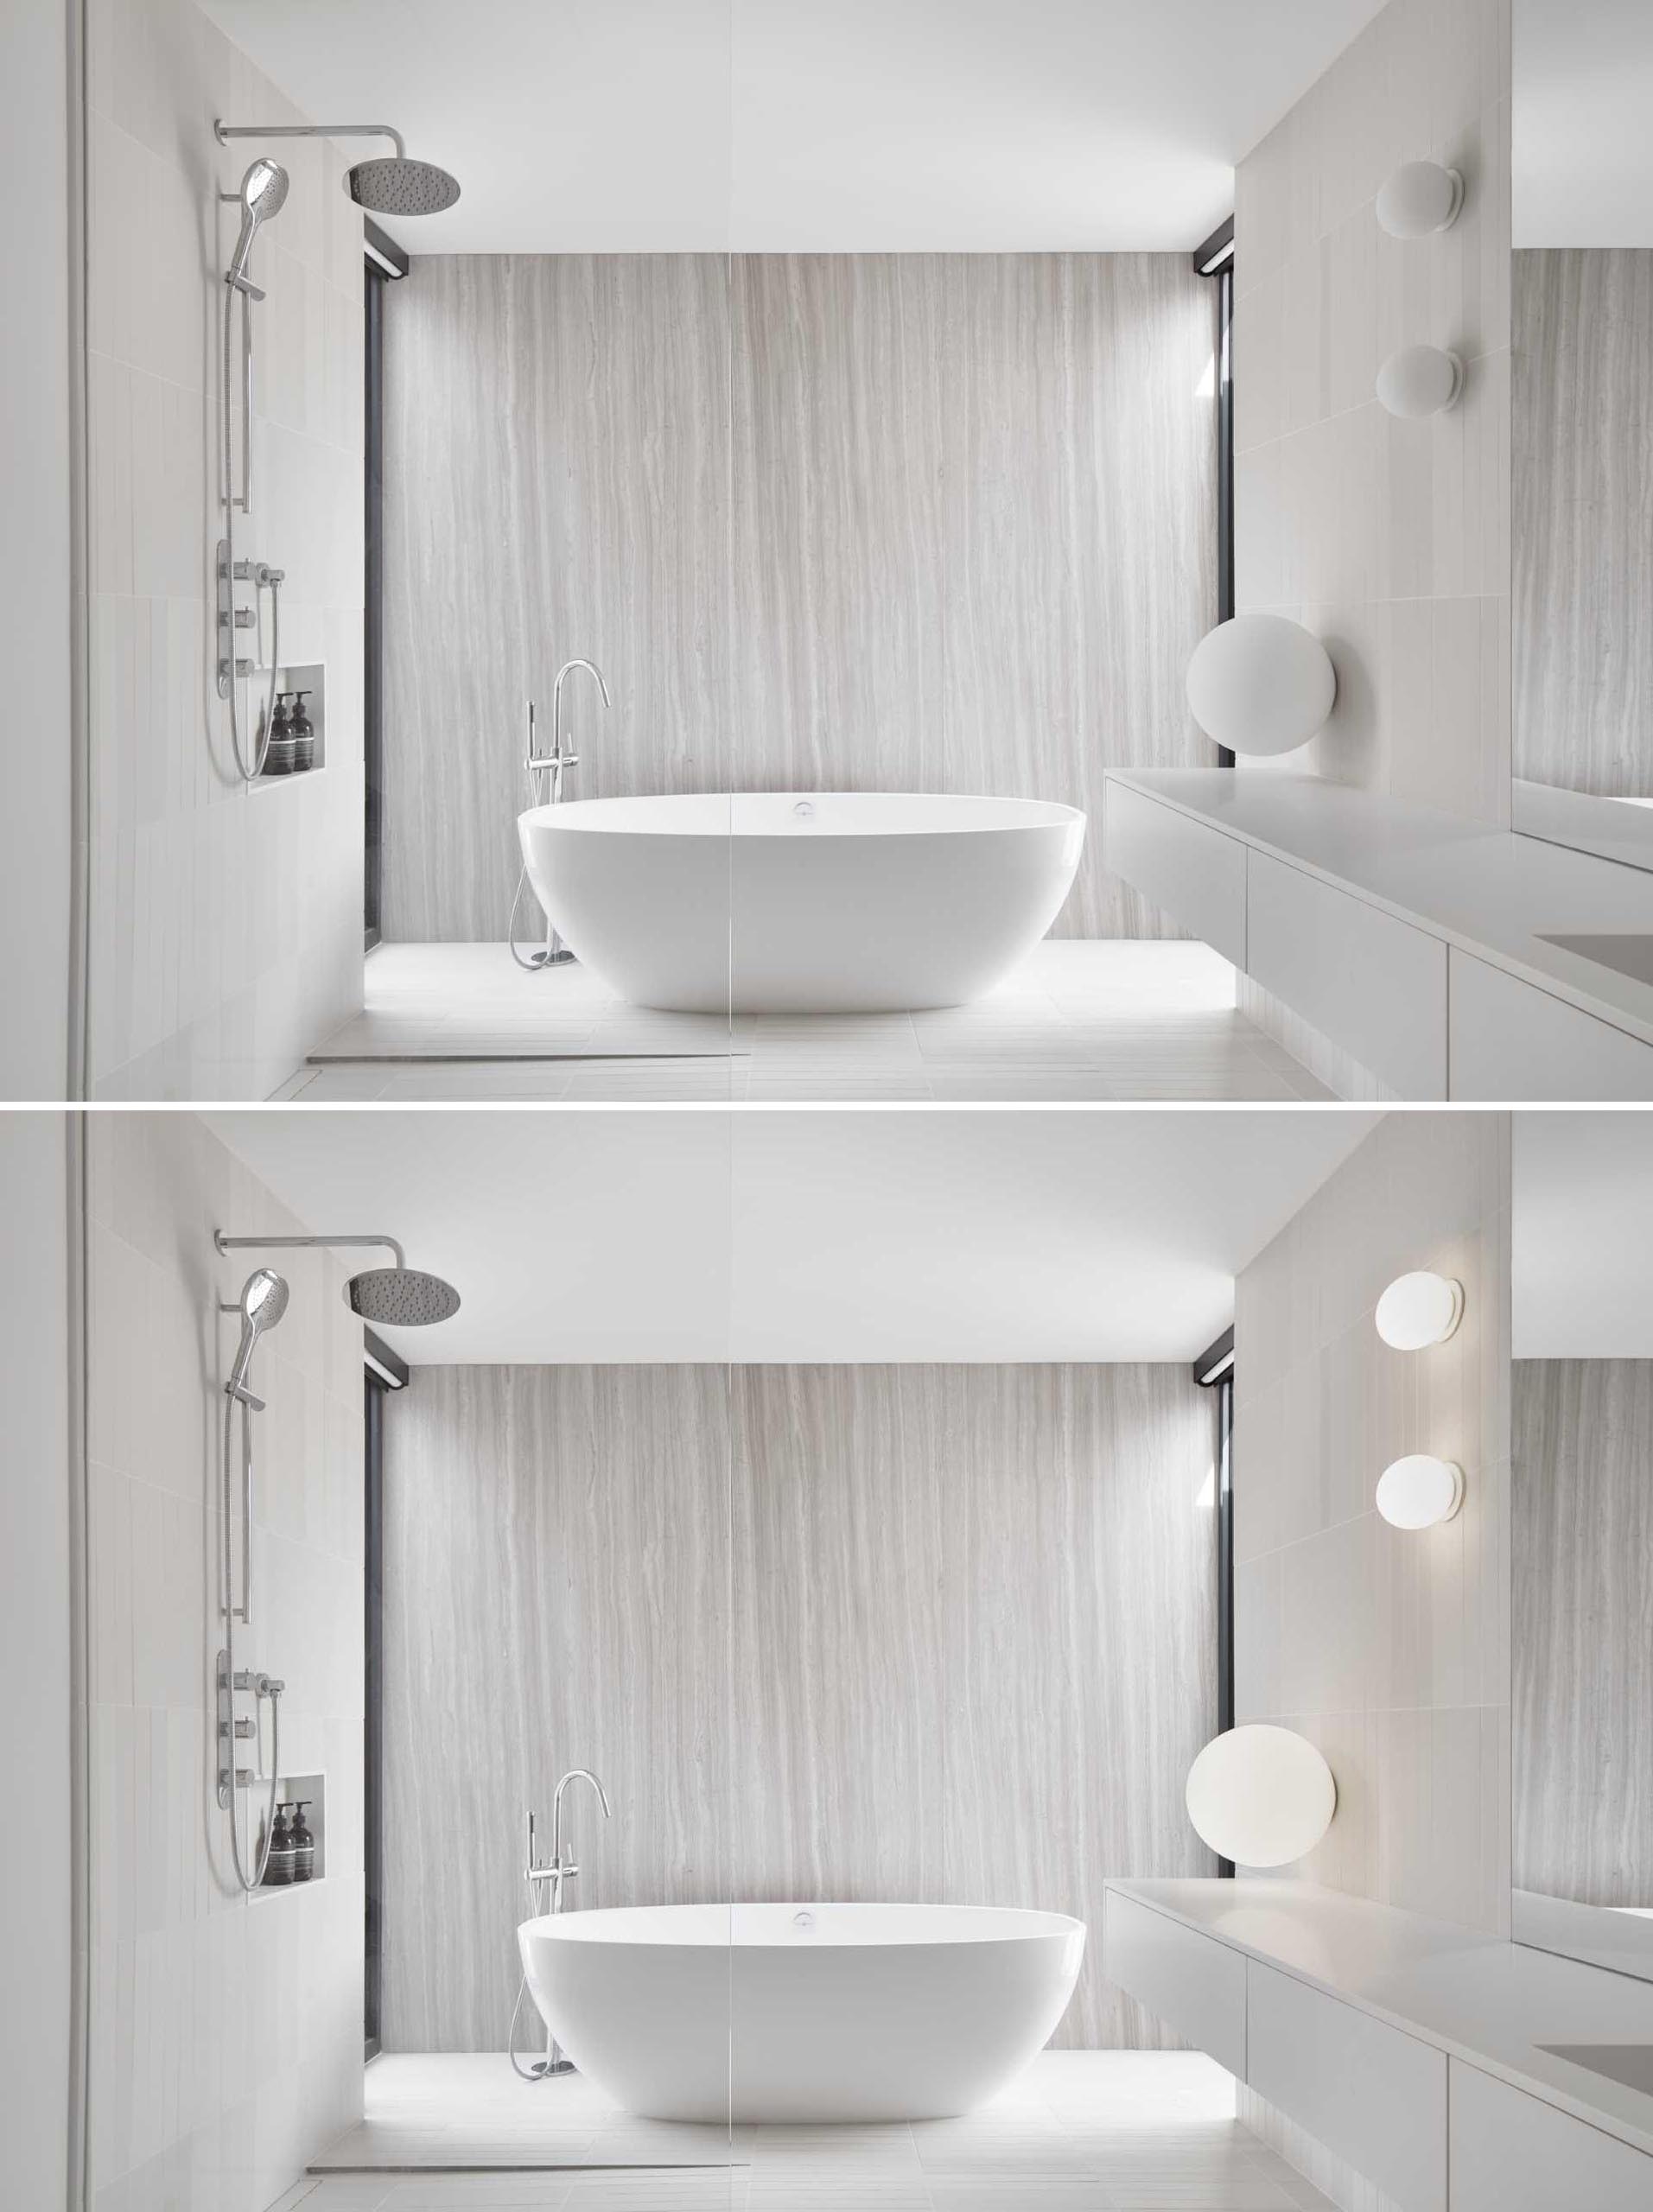 This modern en-suite bathroom has a feature wall made using large limestone slabs, while wall mounted lighting is an interesting way to create a calming atmosphere.